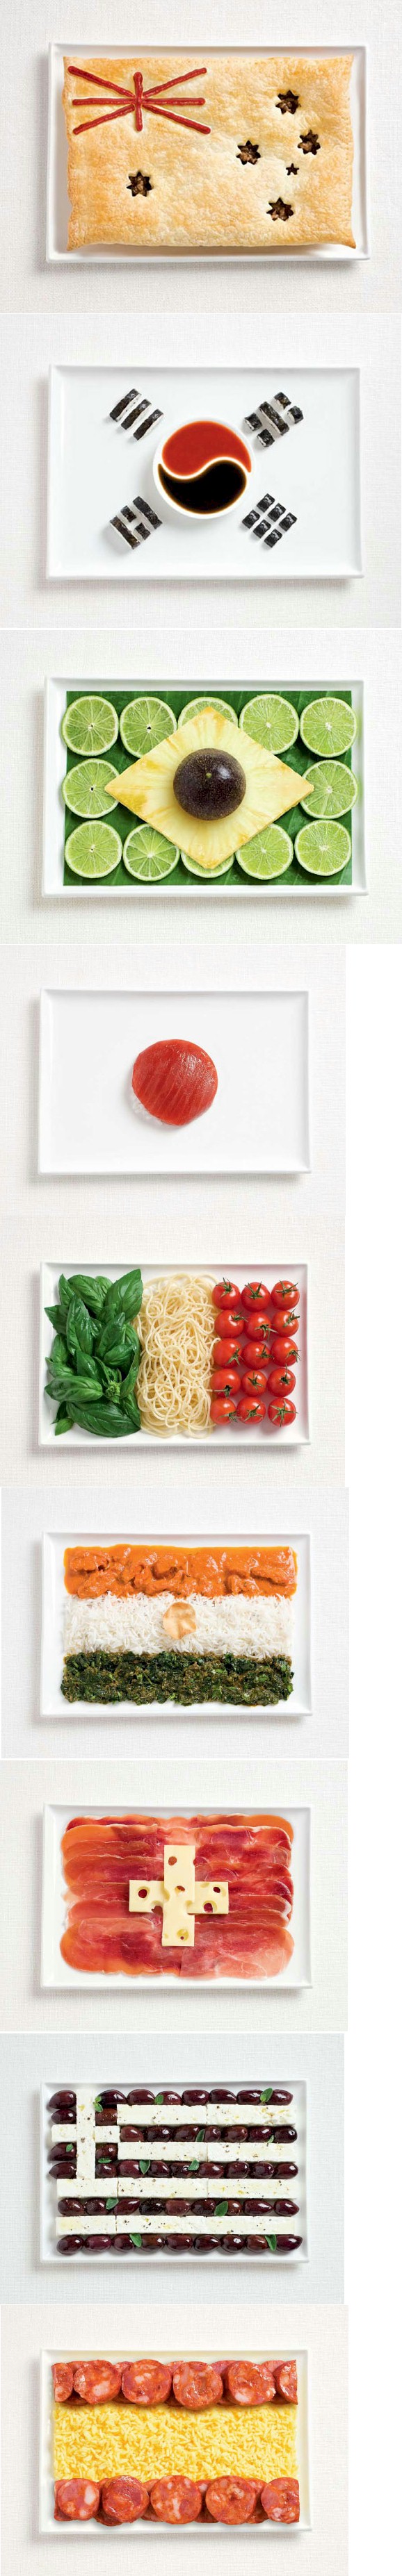 These 'food flags' was created to promote for the Sydney International Food Festival.